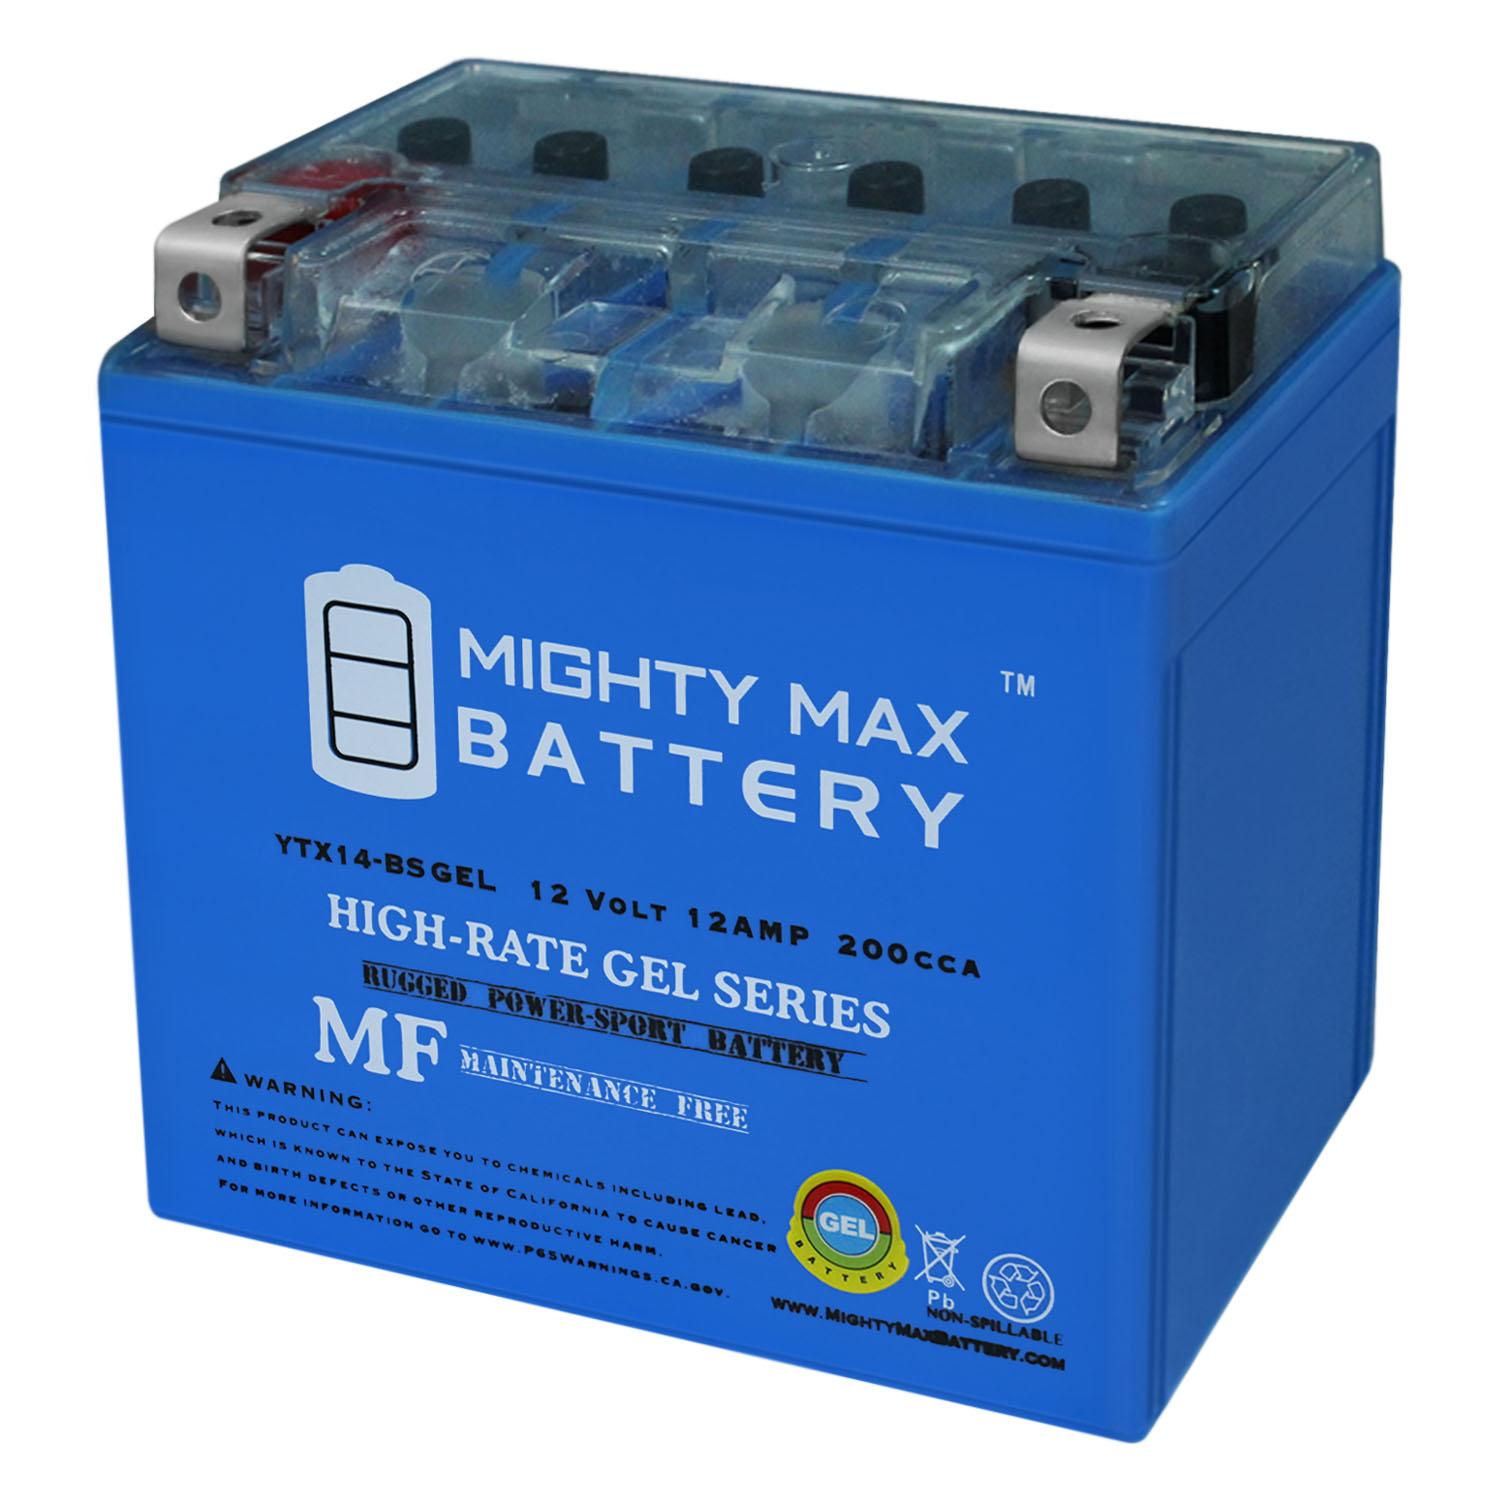 YTX14-BS GEL Battery Replaces Mercedes E S Computer 320 A2115410001 -  MightyMaxBattery